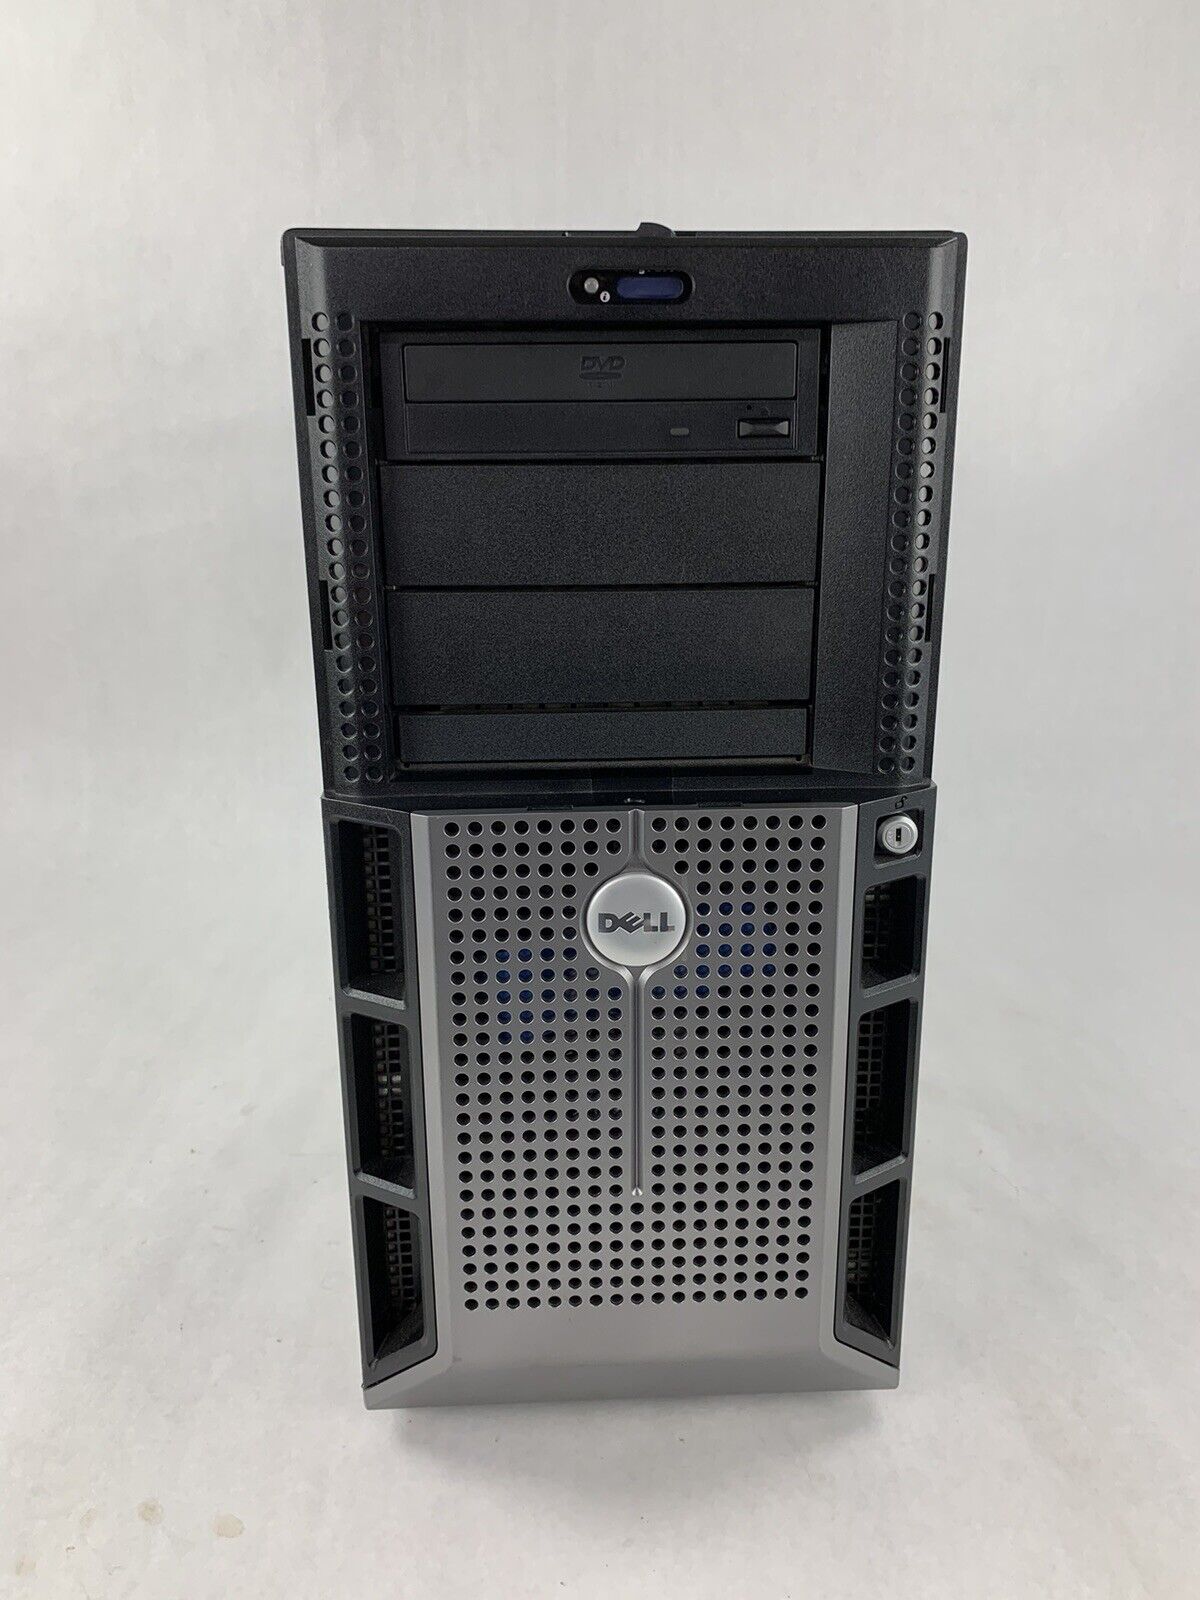 Dell  PowerEdge 2900 , X5260, 3.3 GHz, 24G ram, NO HDD or OS, TESTED.